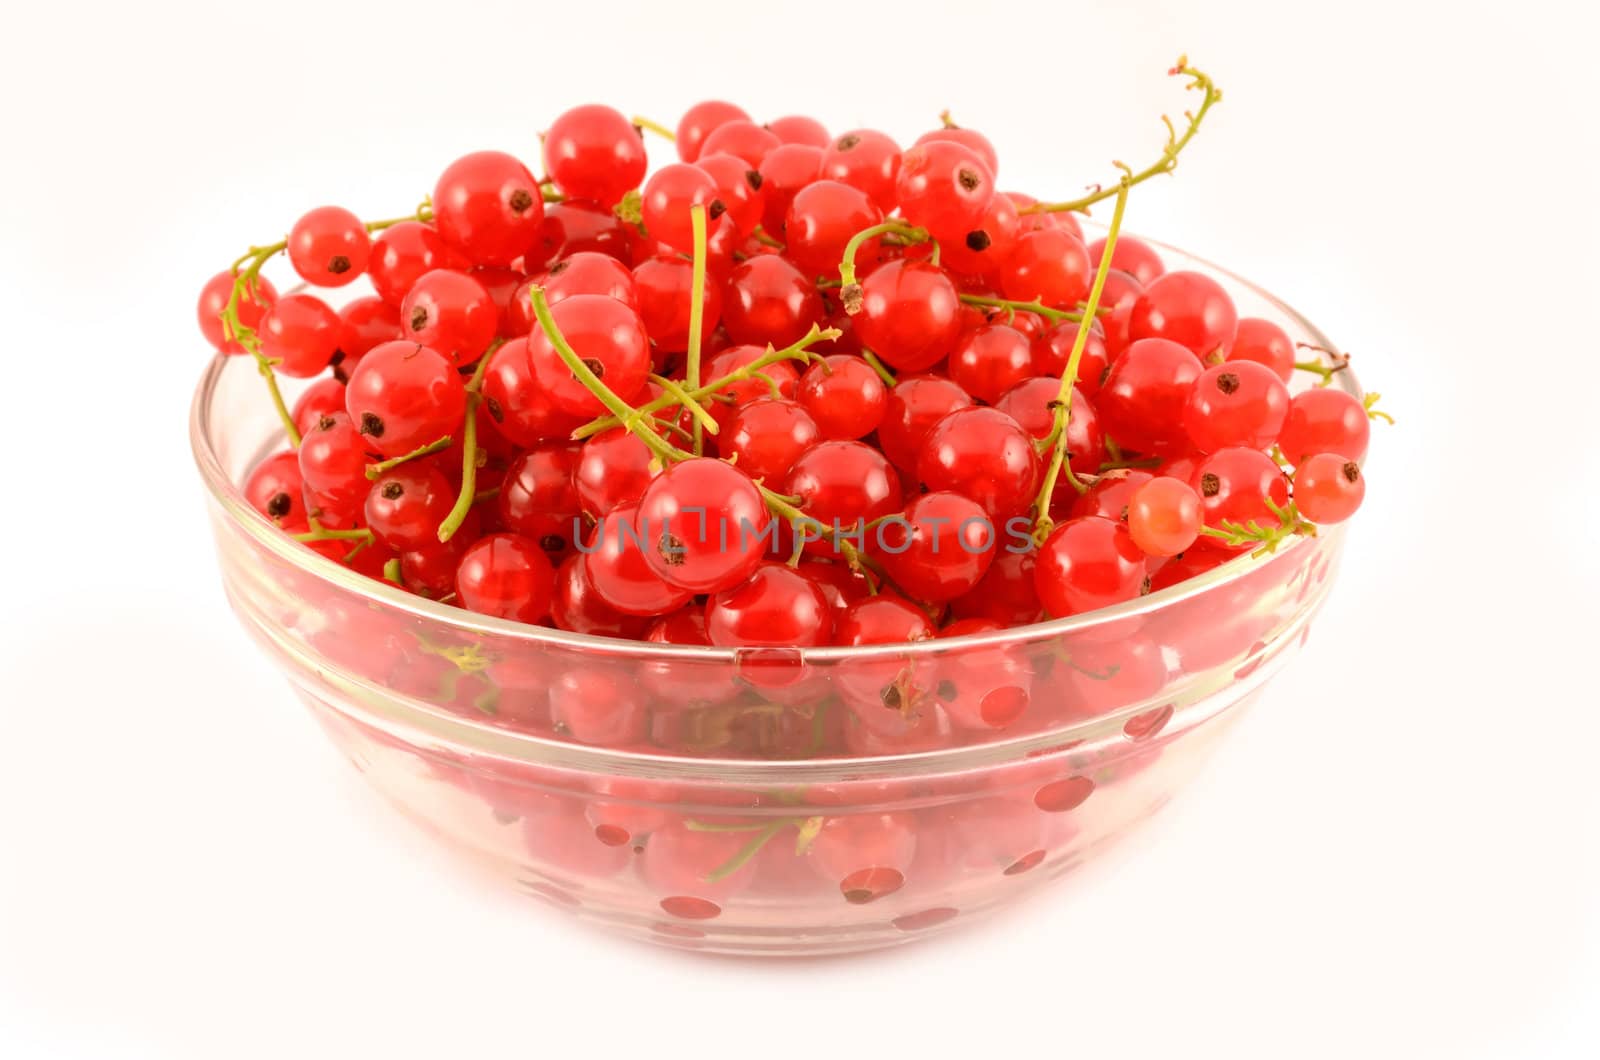 Red currant by subos